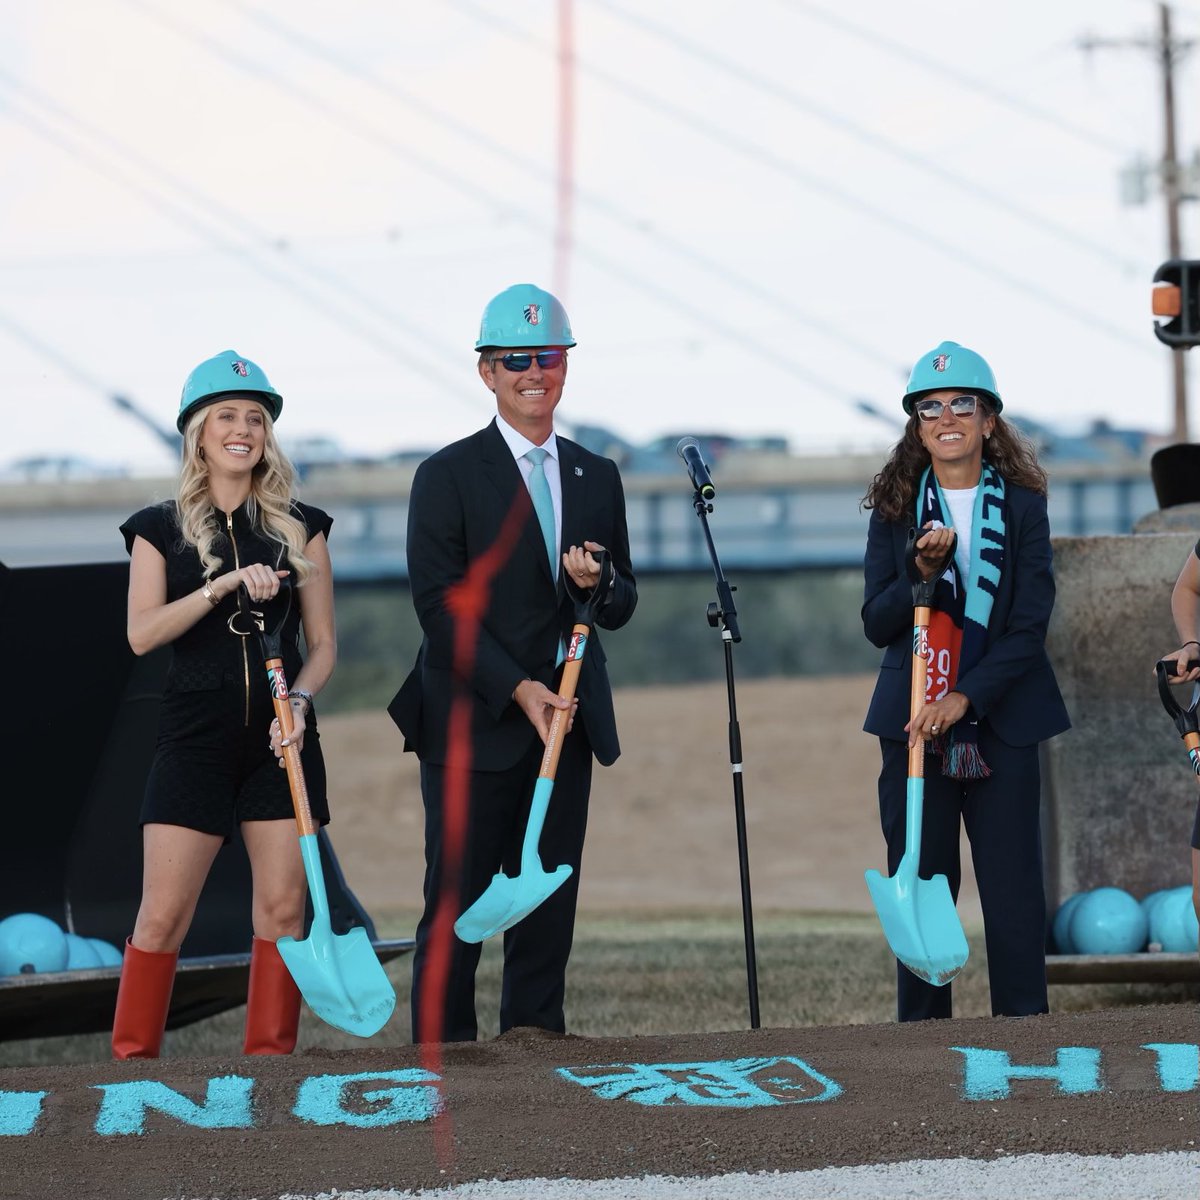 Making history… again. We’ve officially broke ground on the world’s first stadium purpose-built for a women’s professional team.